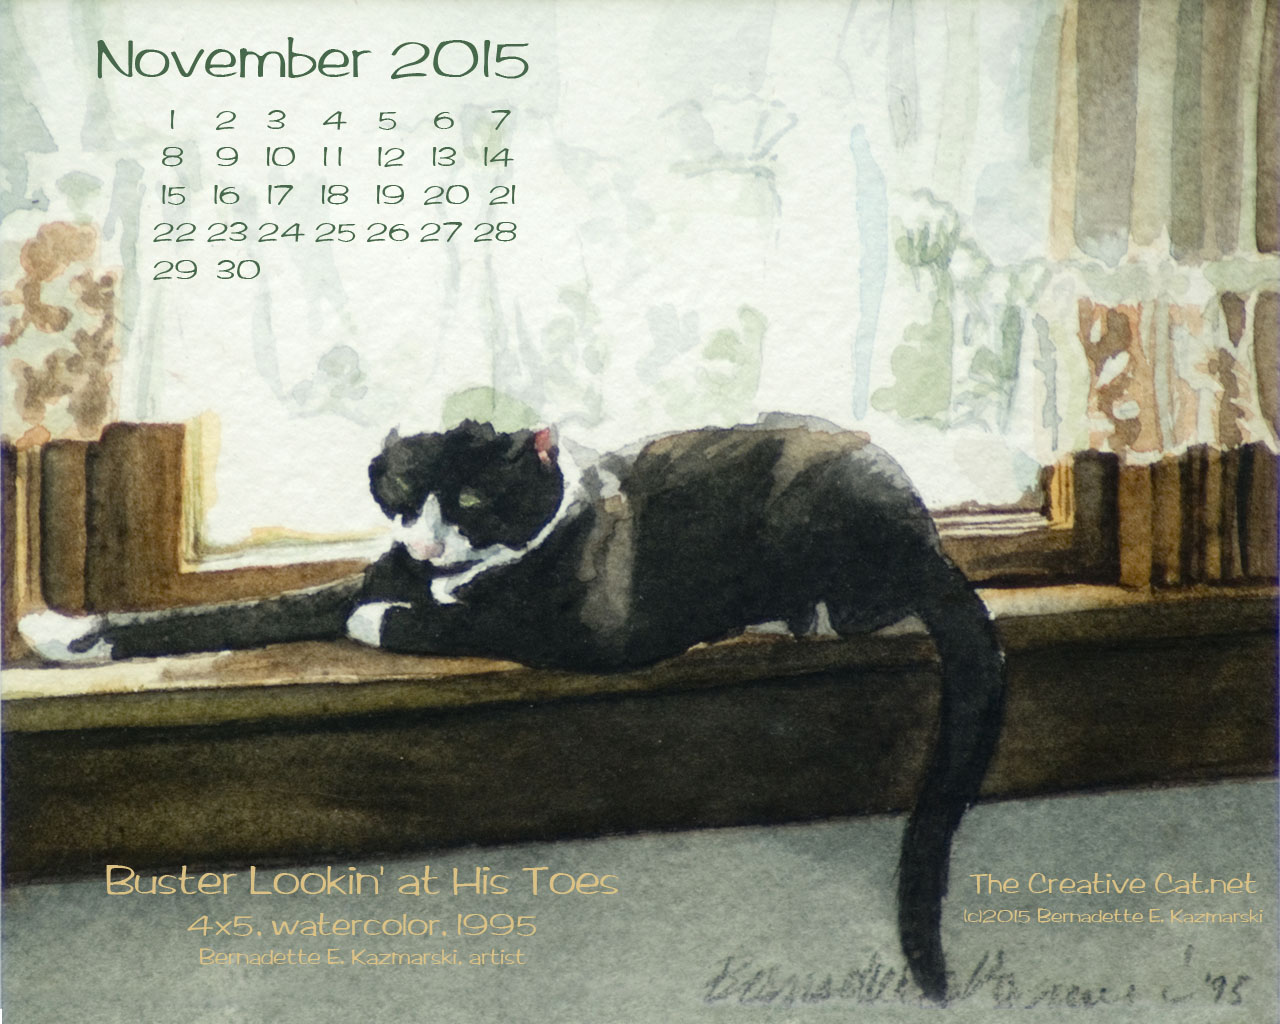 "Buster Lookin' at His Toes" desktop calendar, 1280 x 1024 for square and laptop monitors.